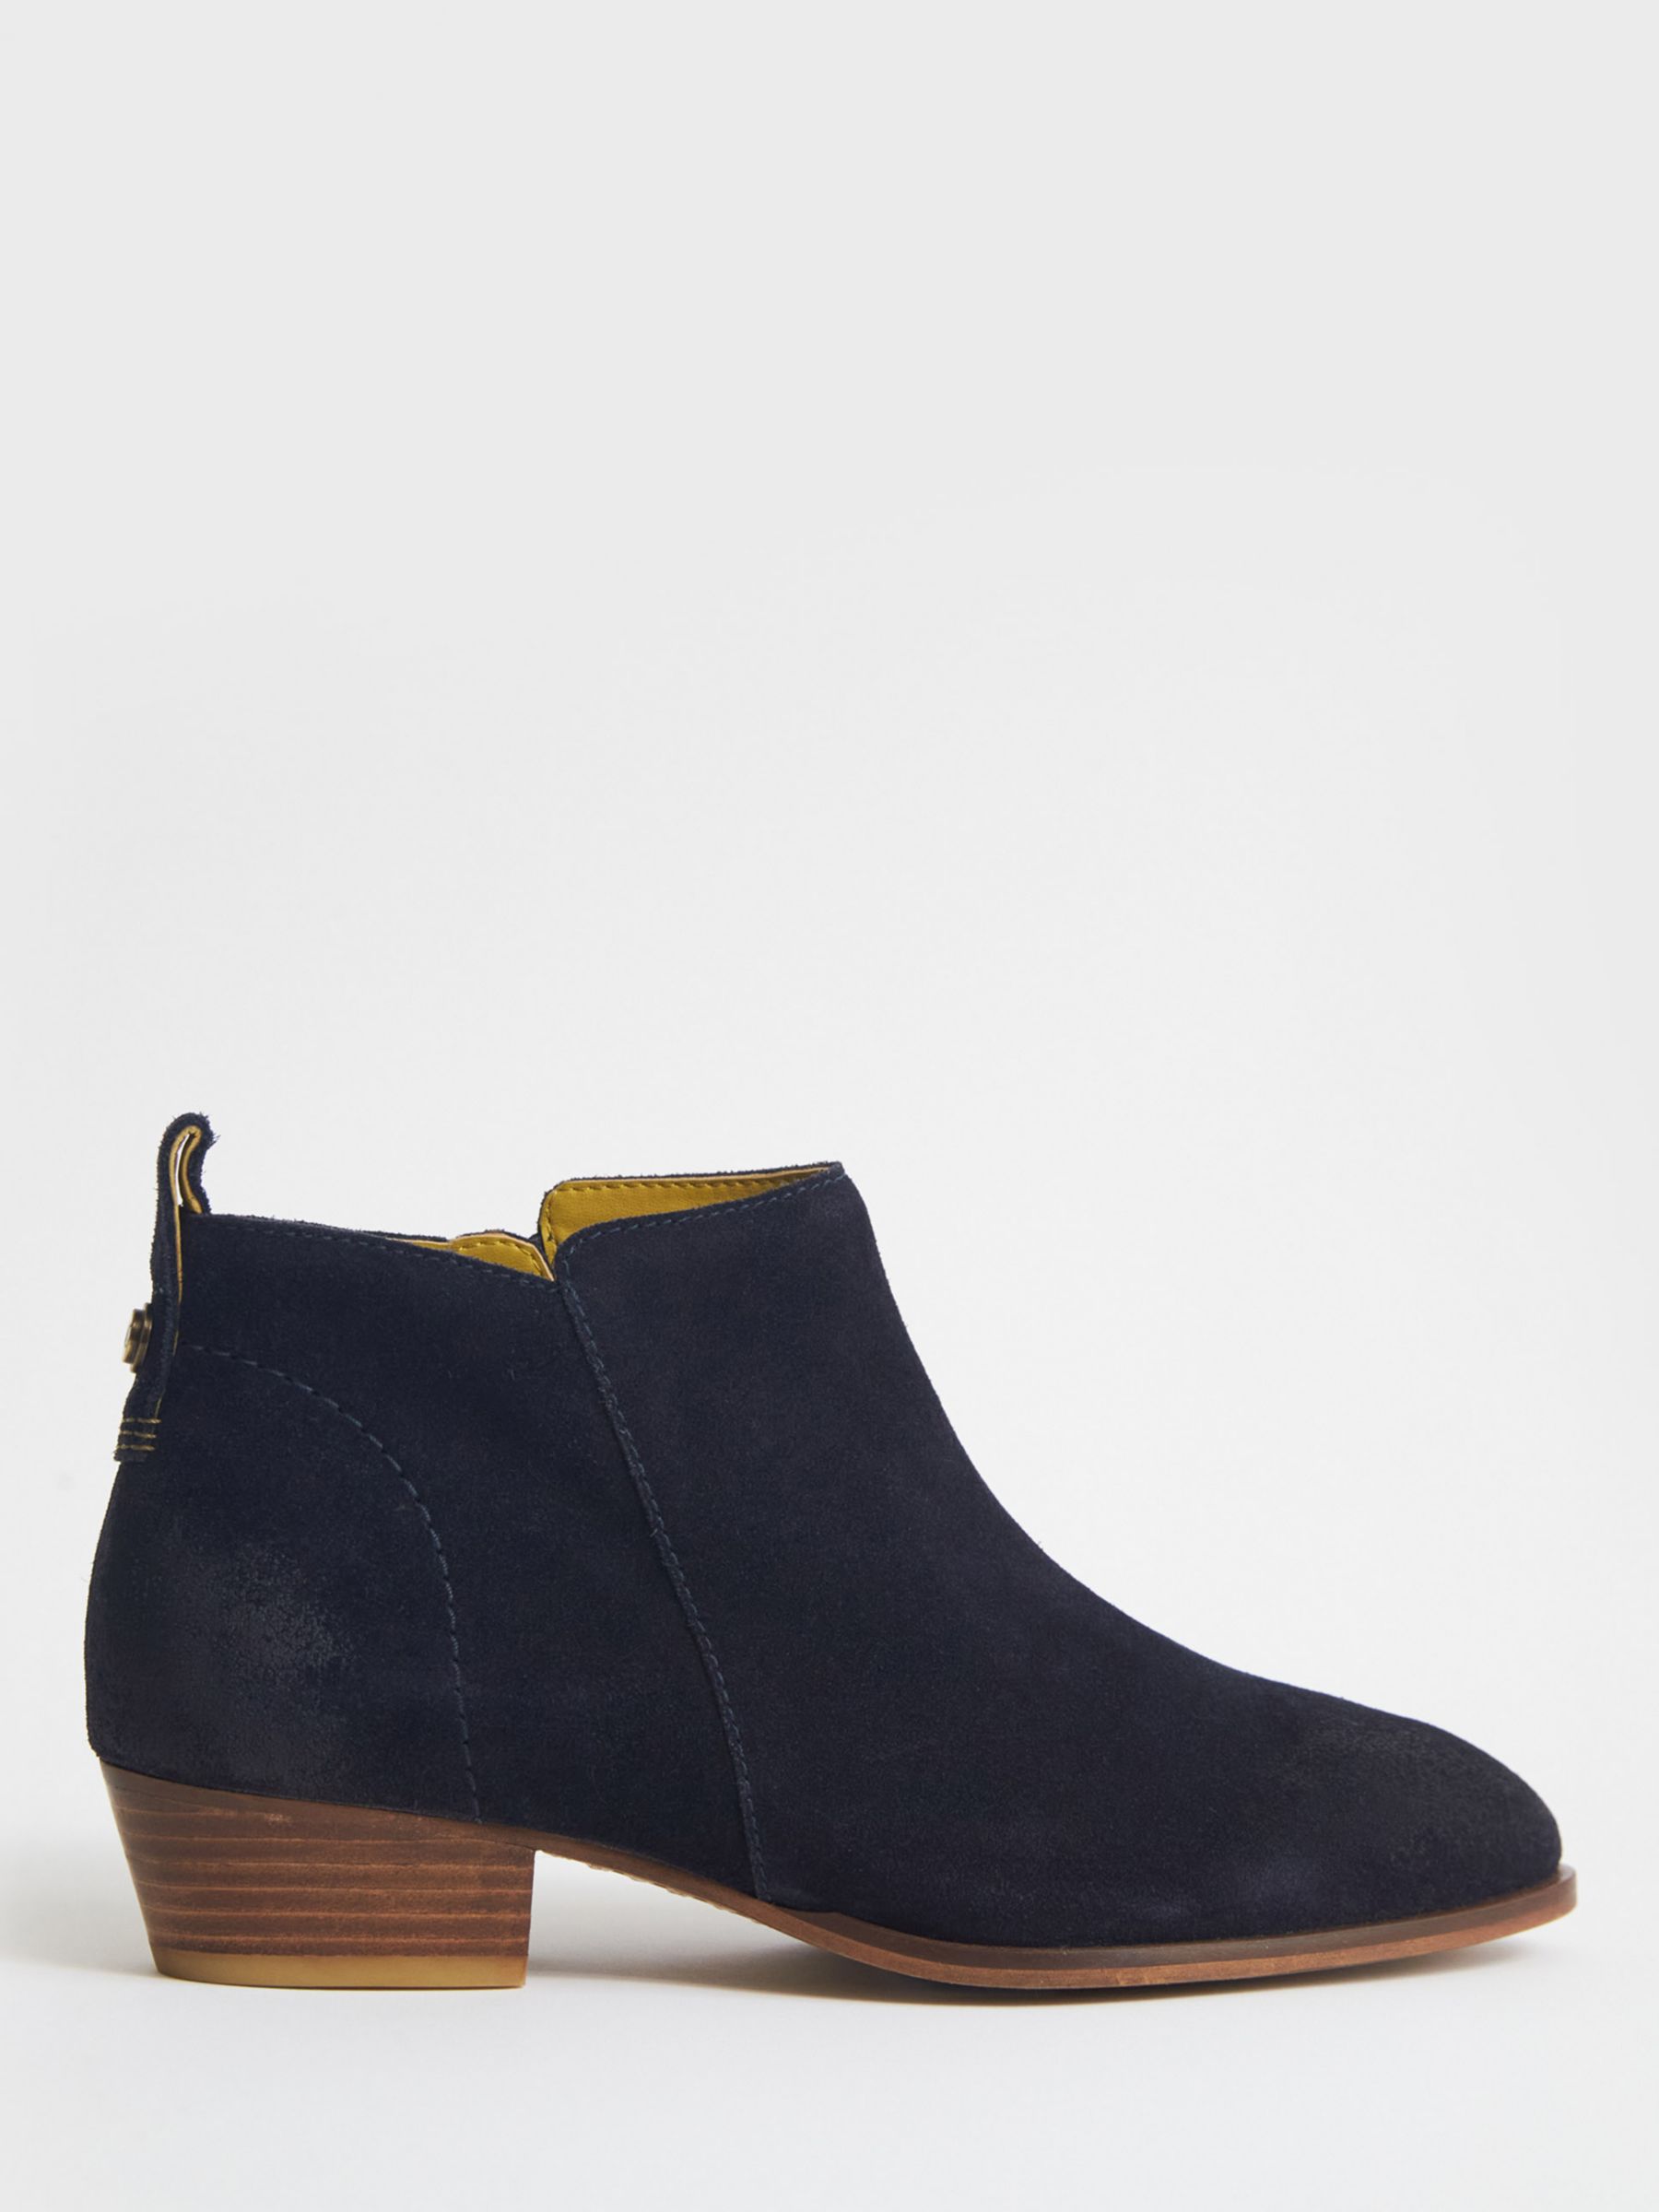 White Stuff Willow Suede Shoe Boots, Navy, 8